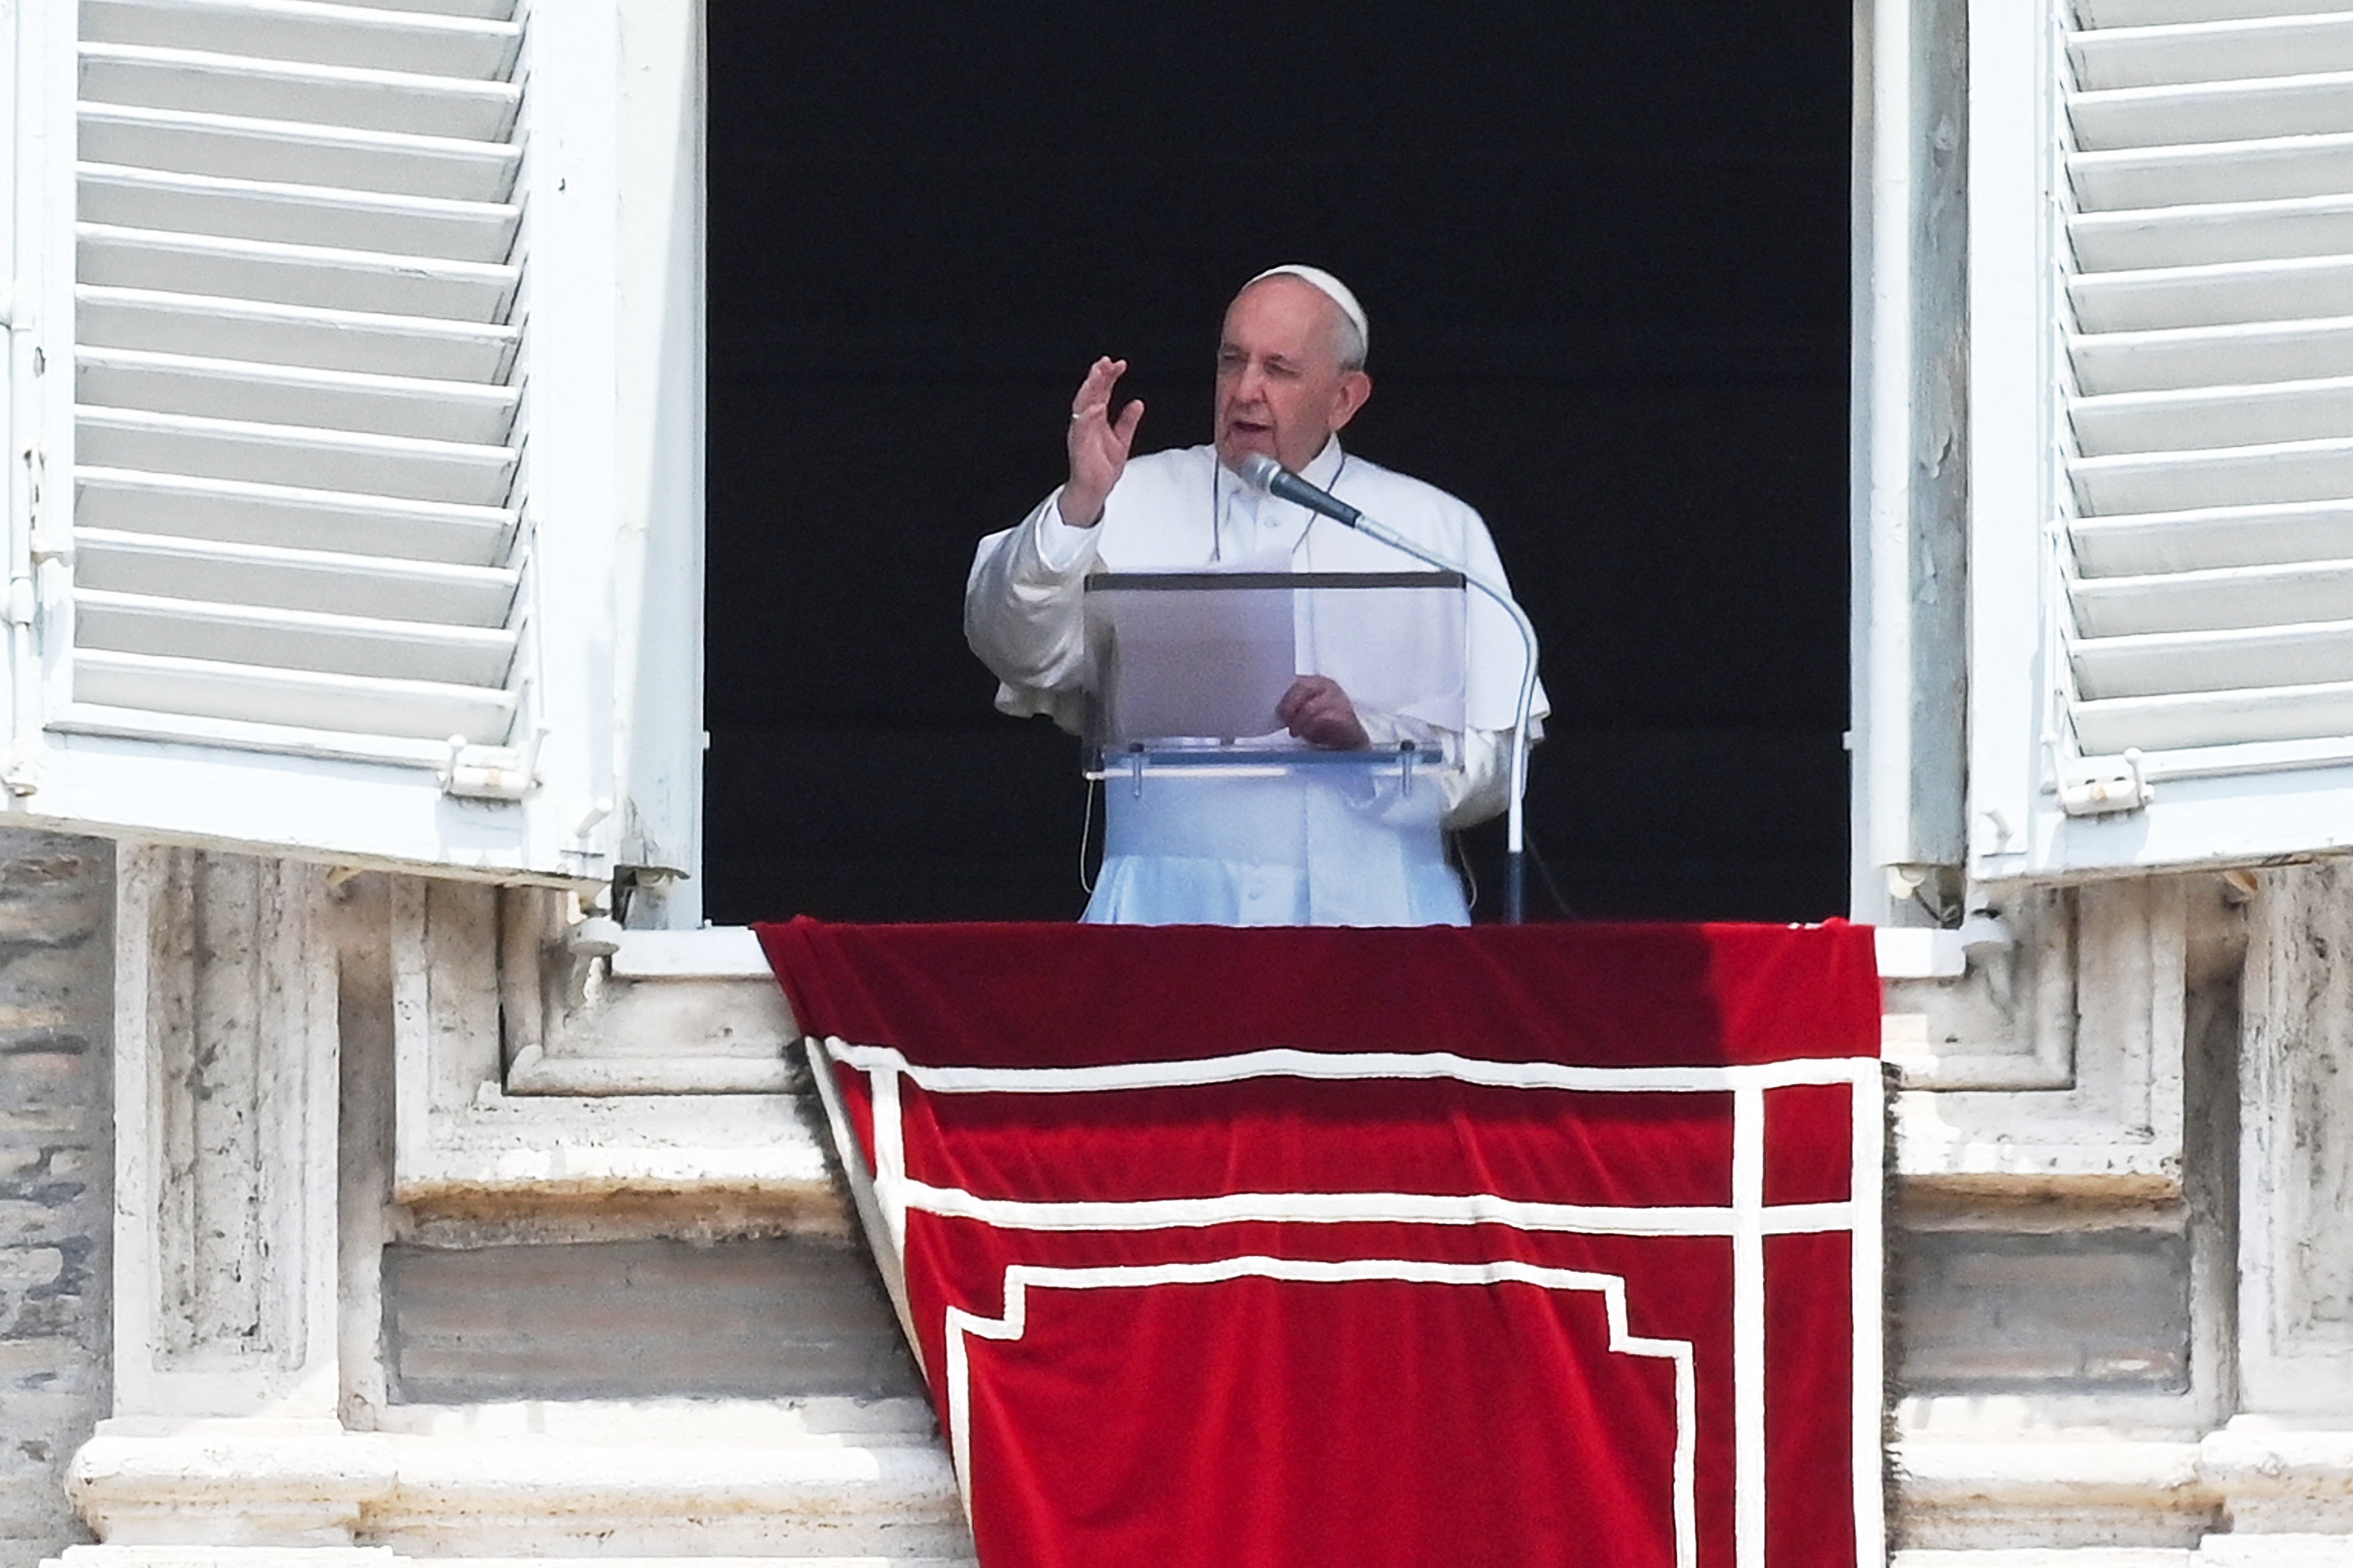 Pope Francis leading the Sunday Angelus prayer from his window at the Vatican on 4 July